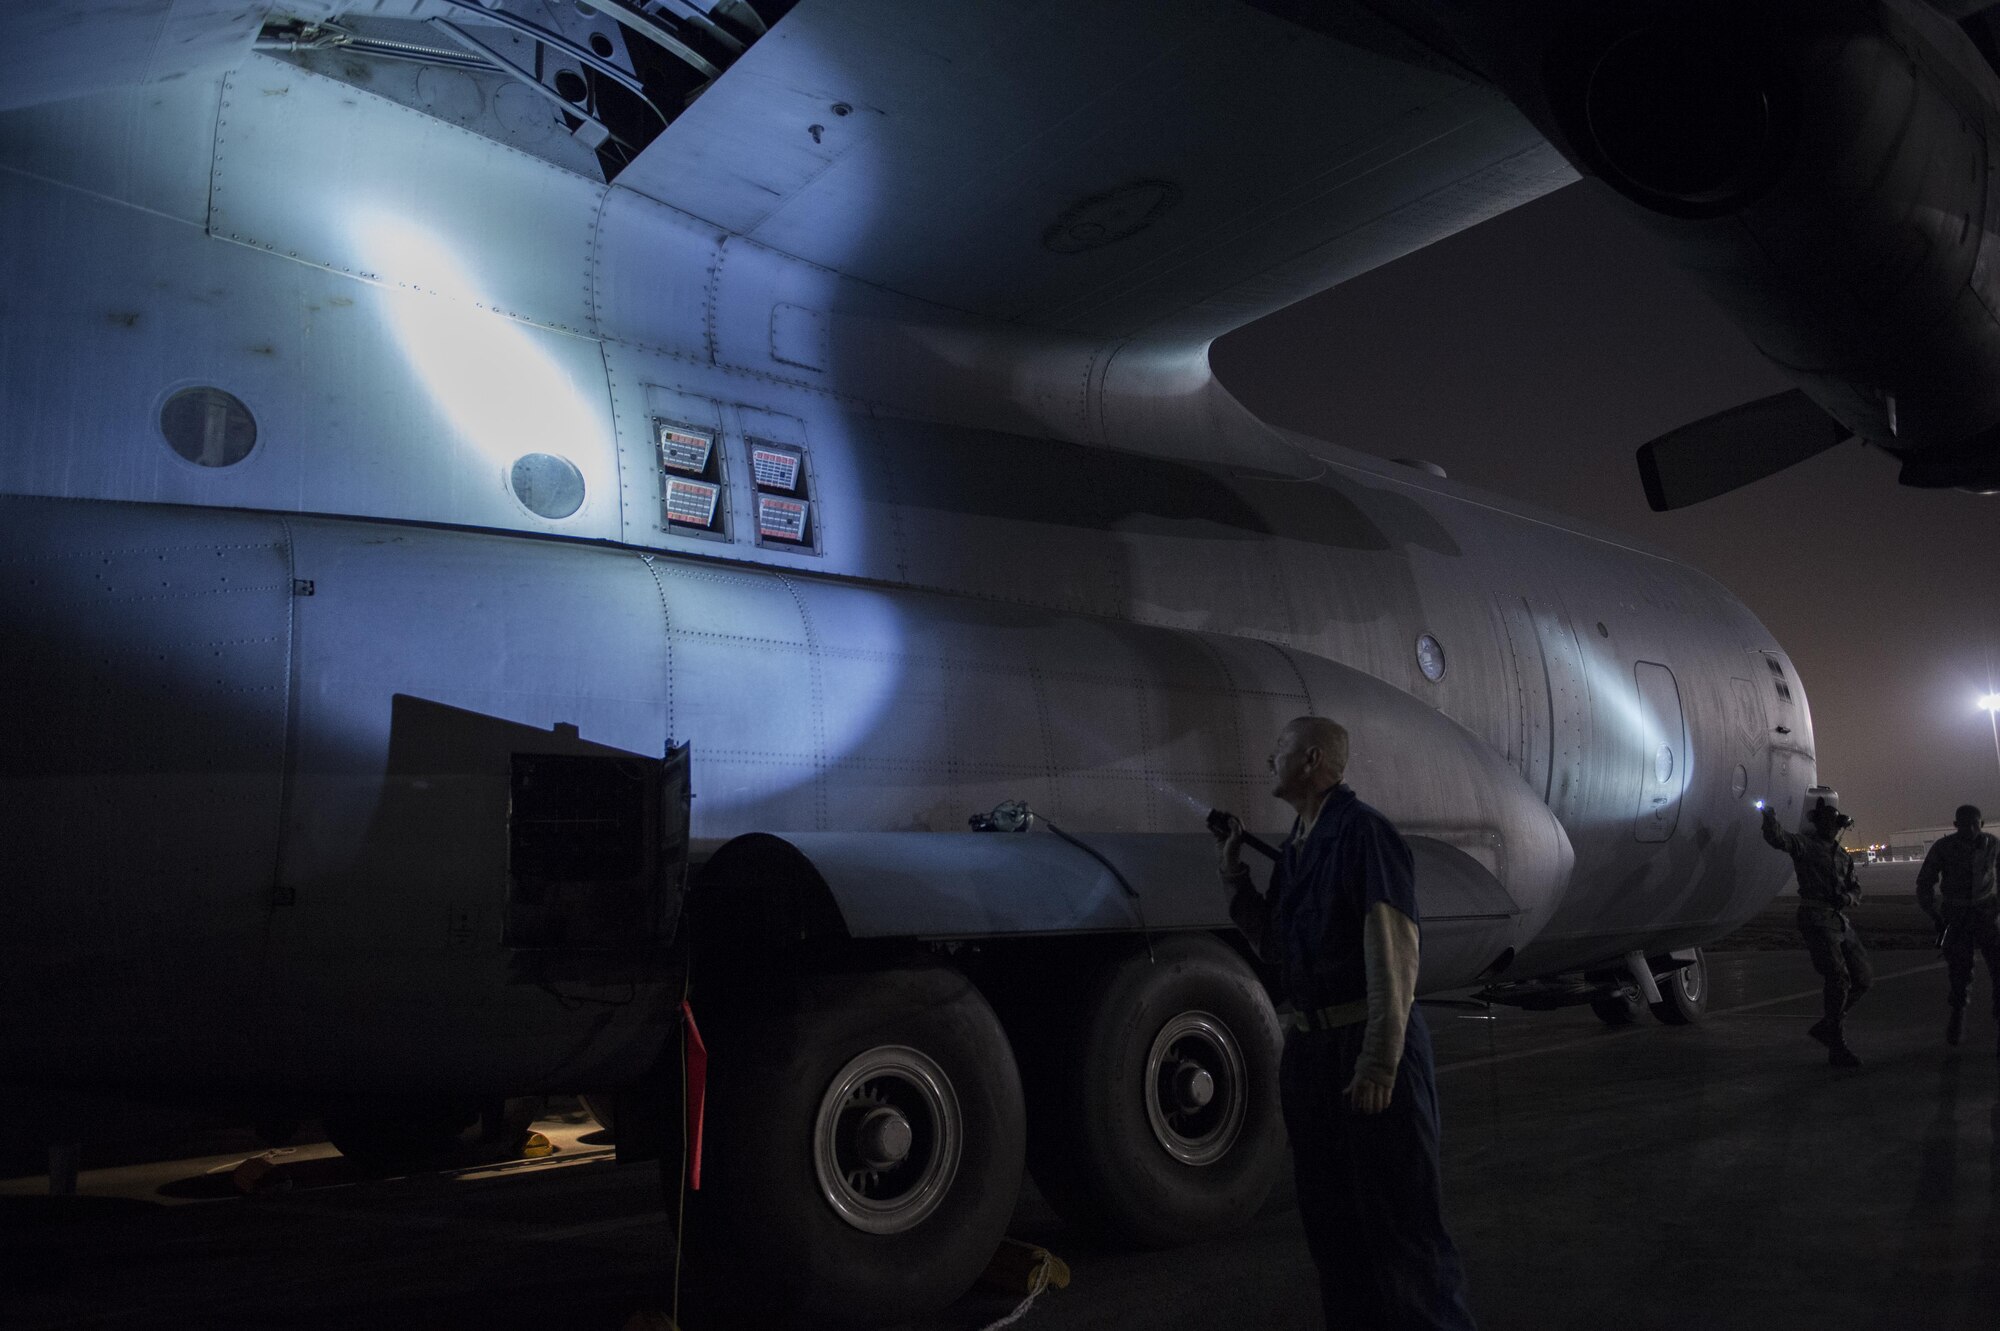 U.S. Air Force Airmen from the 746th Expeditionary Aircraft Maintenance Squadron inspect a C-130H Hercules at Al Udeid Air Base, Qatar, in support of Operation Inherent Resolve, Jan. 6, 2016. OIR is the coalition intervention against the Islamic State of Iraq and the Levant. (U.S. Air Force photo by Tech. Sgt. Nathan Lipscomb)